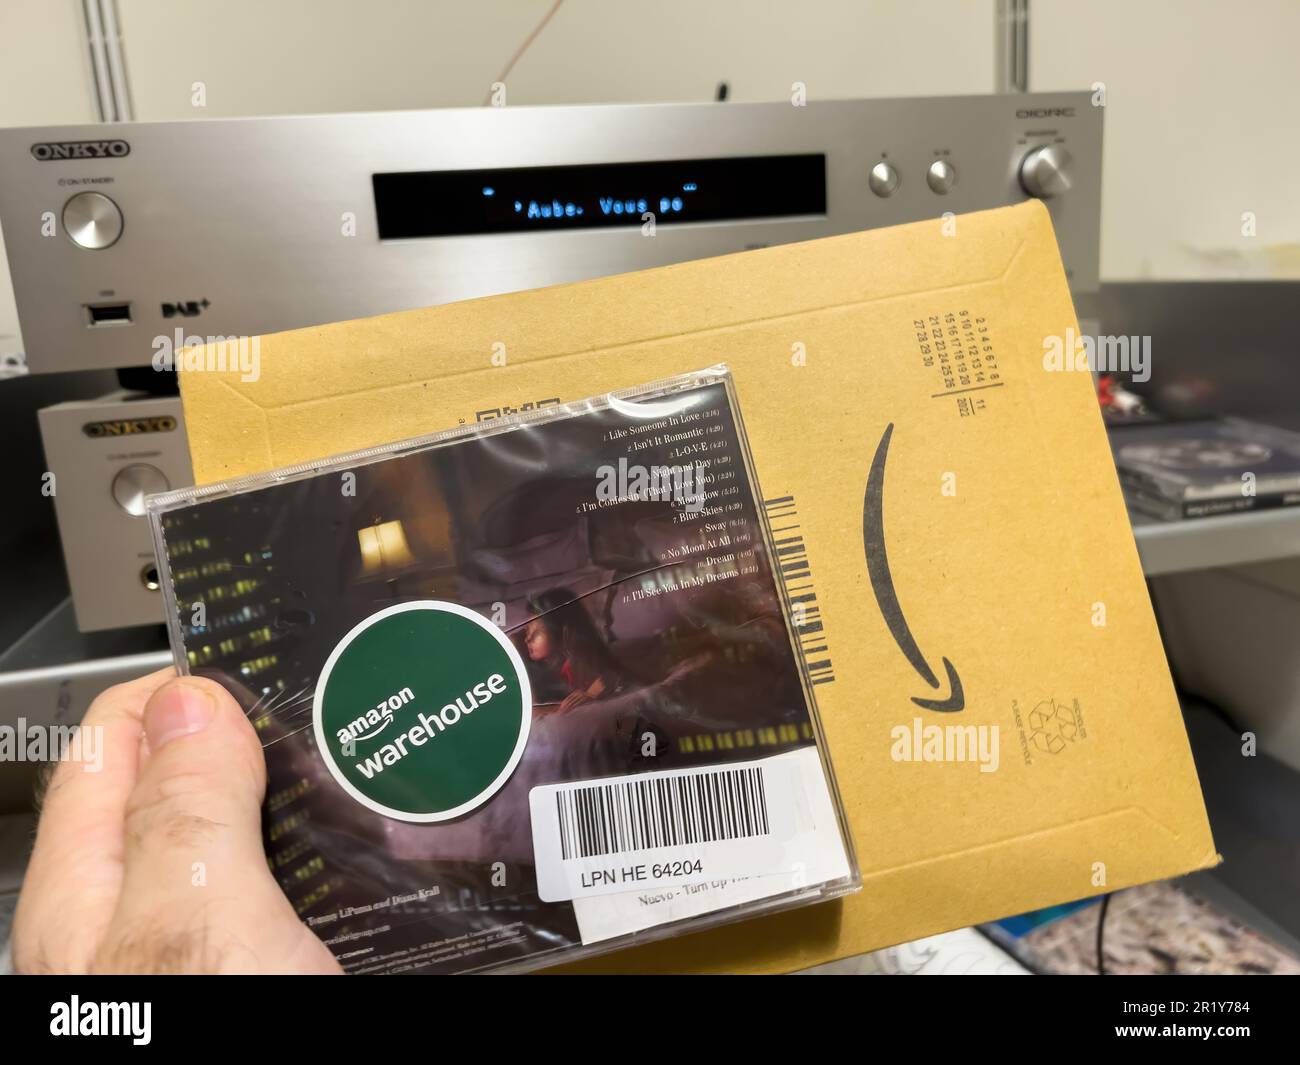 Paris, France - Dec 16, 2022: A man holds a damaged compact audio disk, the latest release from Diana Krall. The damage occurred during transport by Amazon in its cardboard package Stock Photo